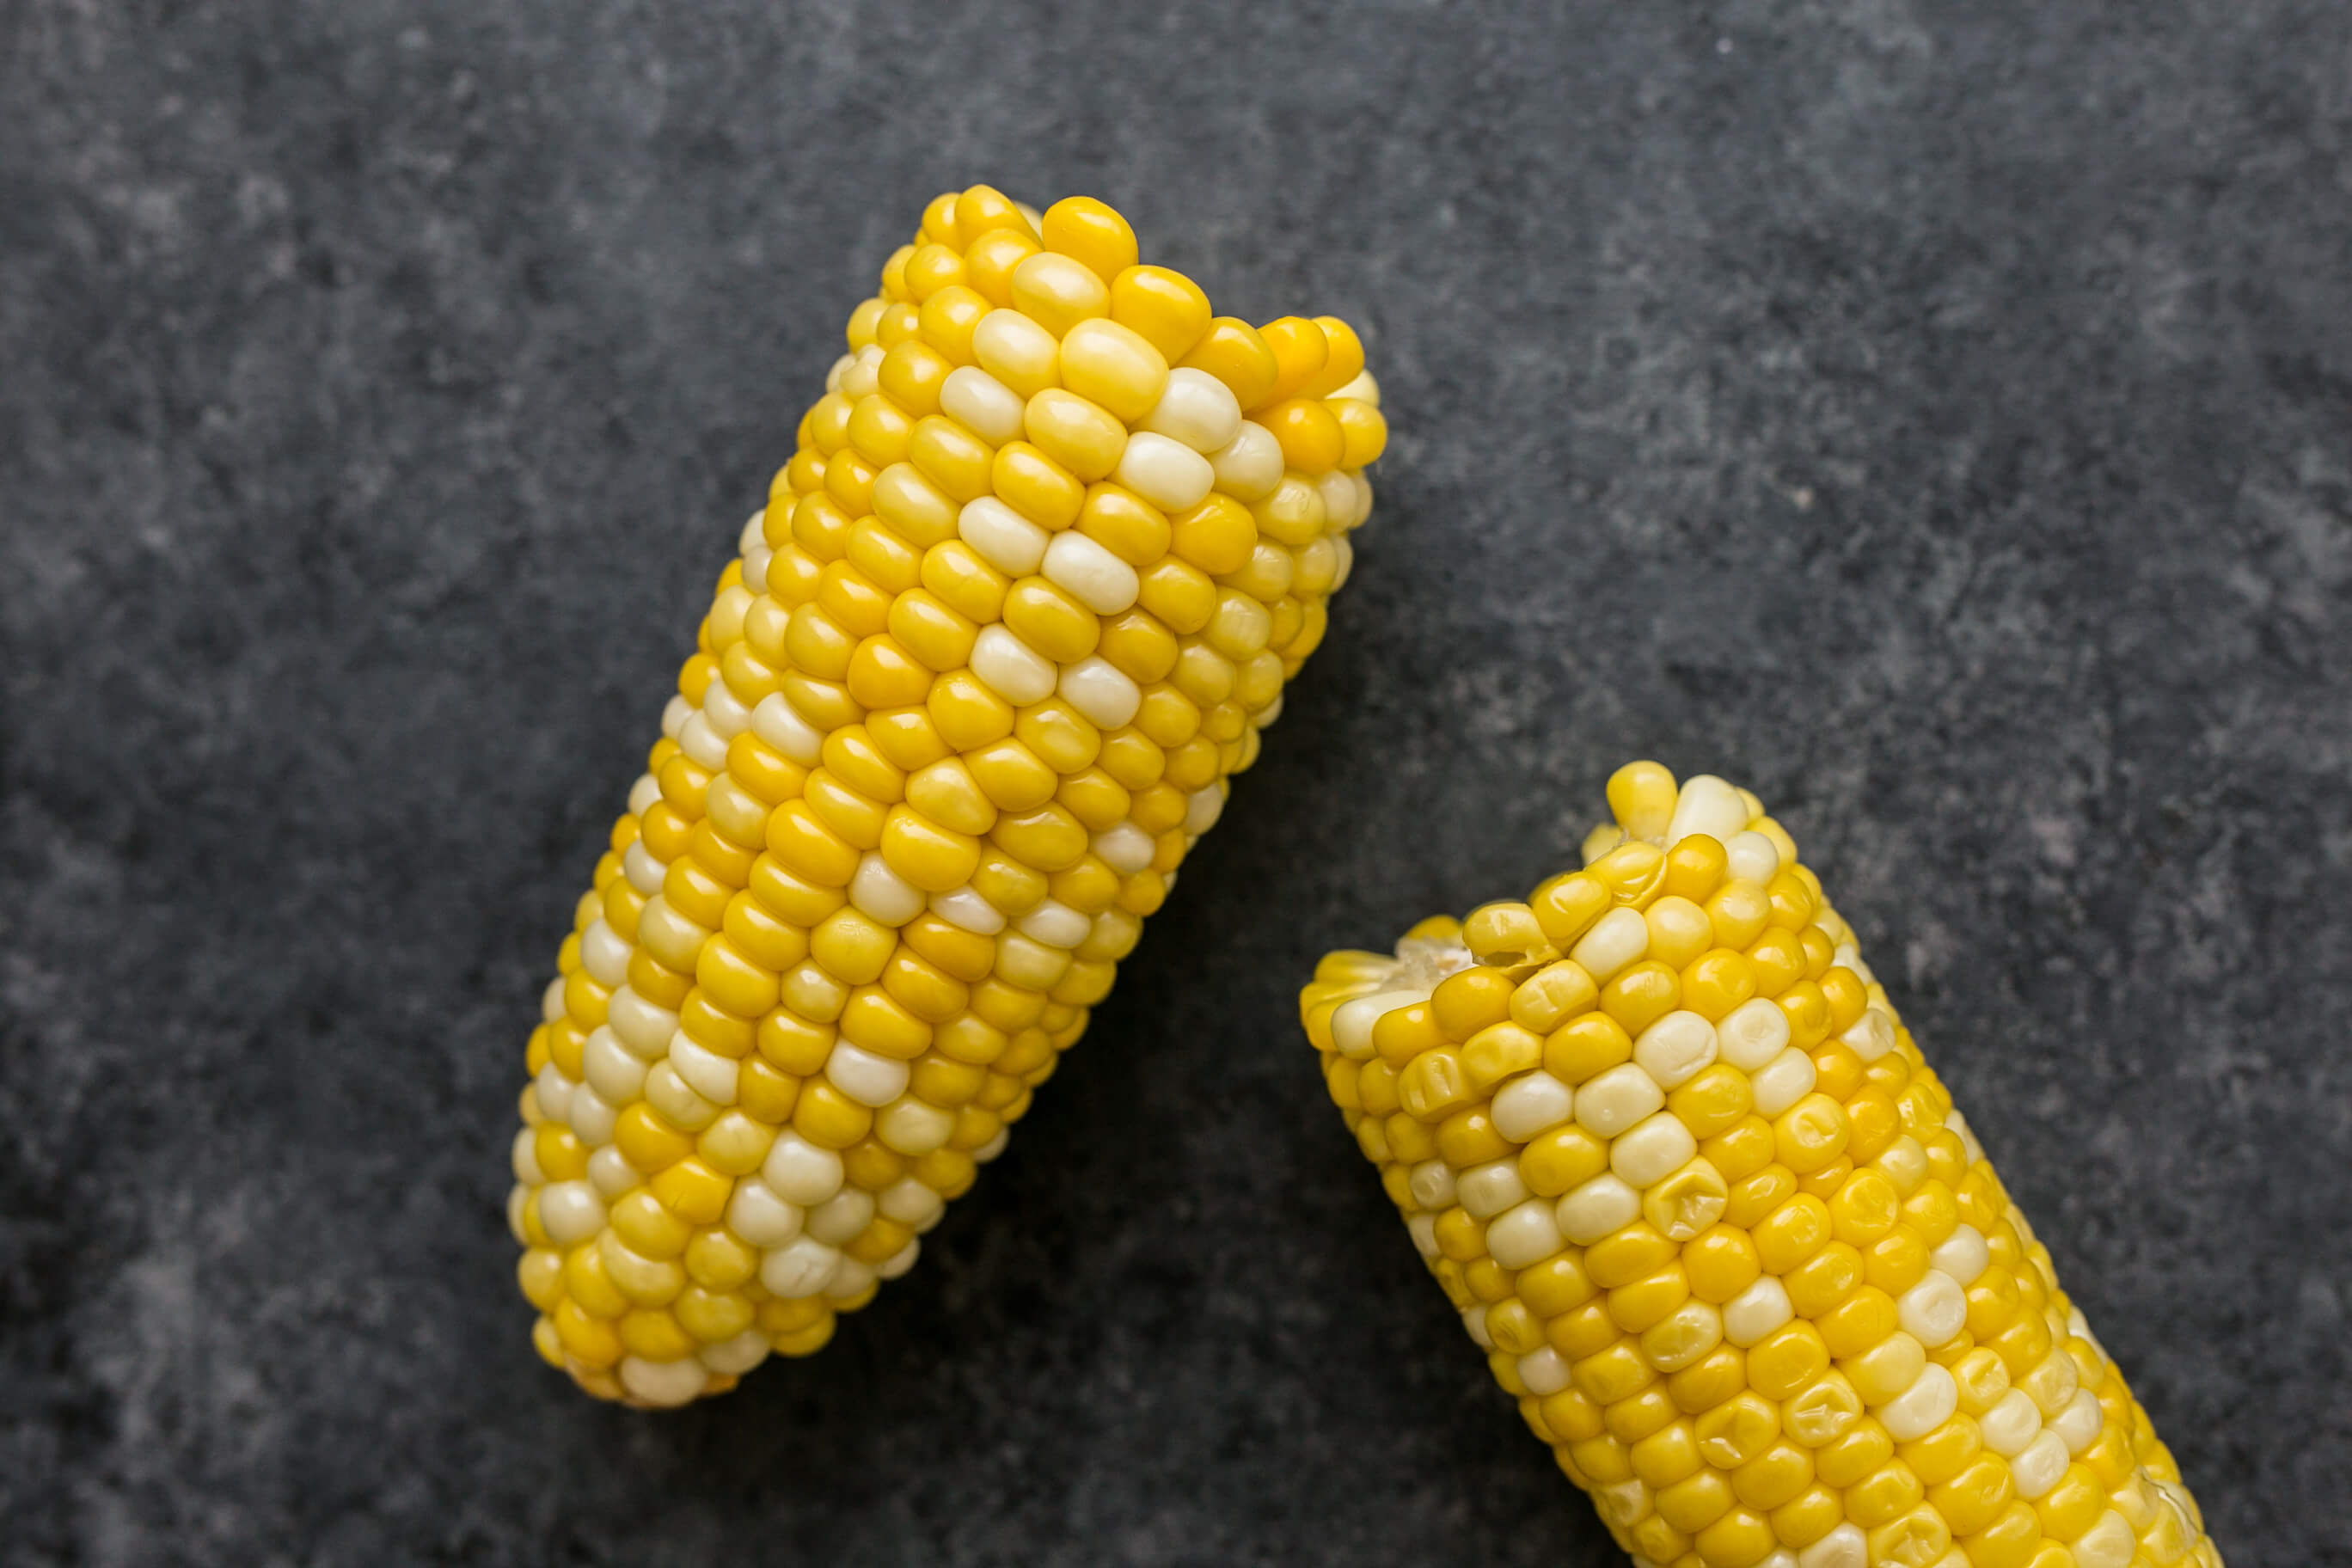 20 Summer-Inspired Meals Your Clients Will Love: Steamed Corn on the Cob